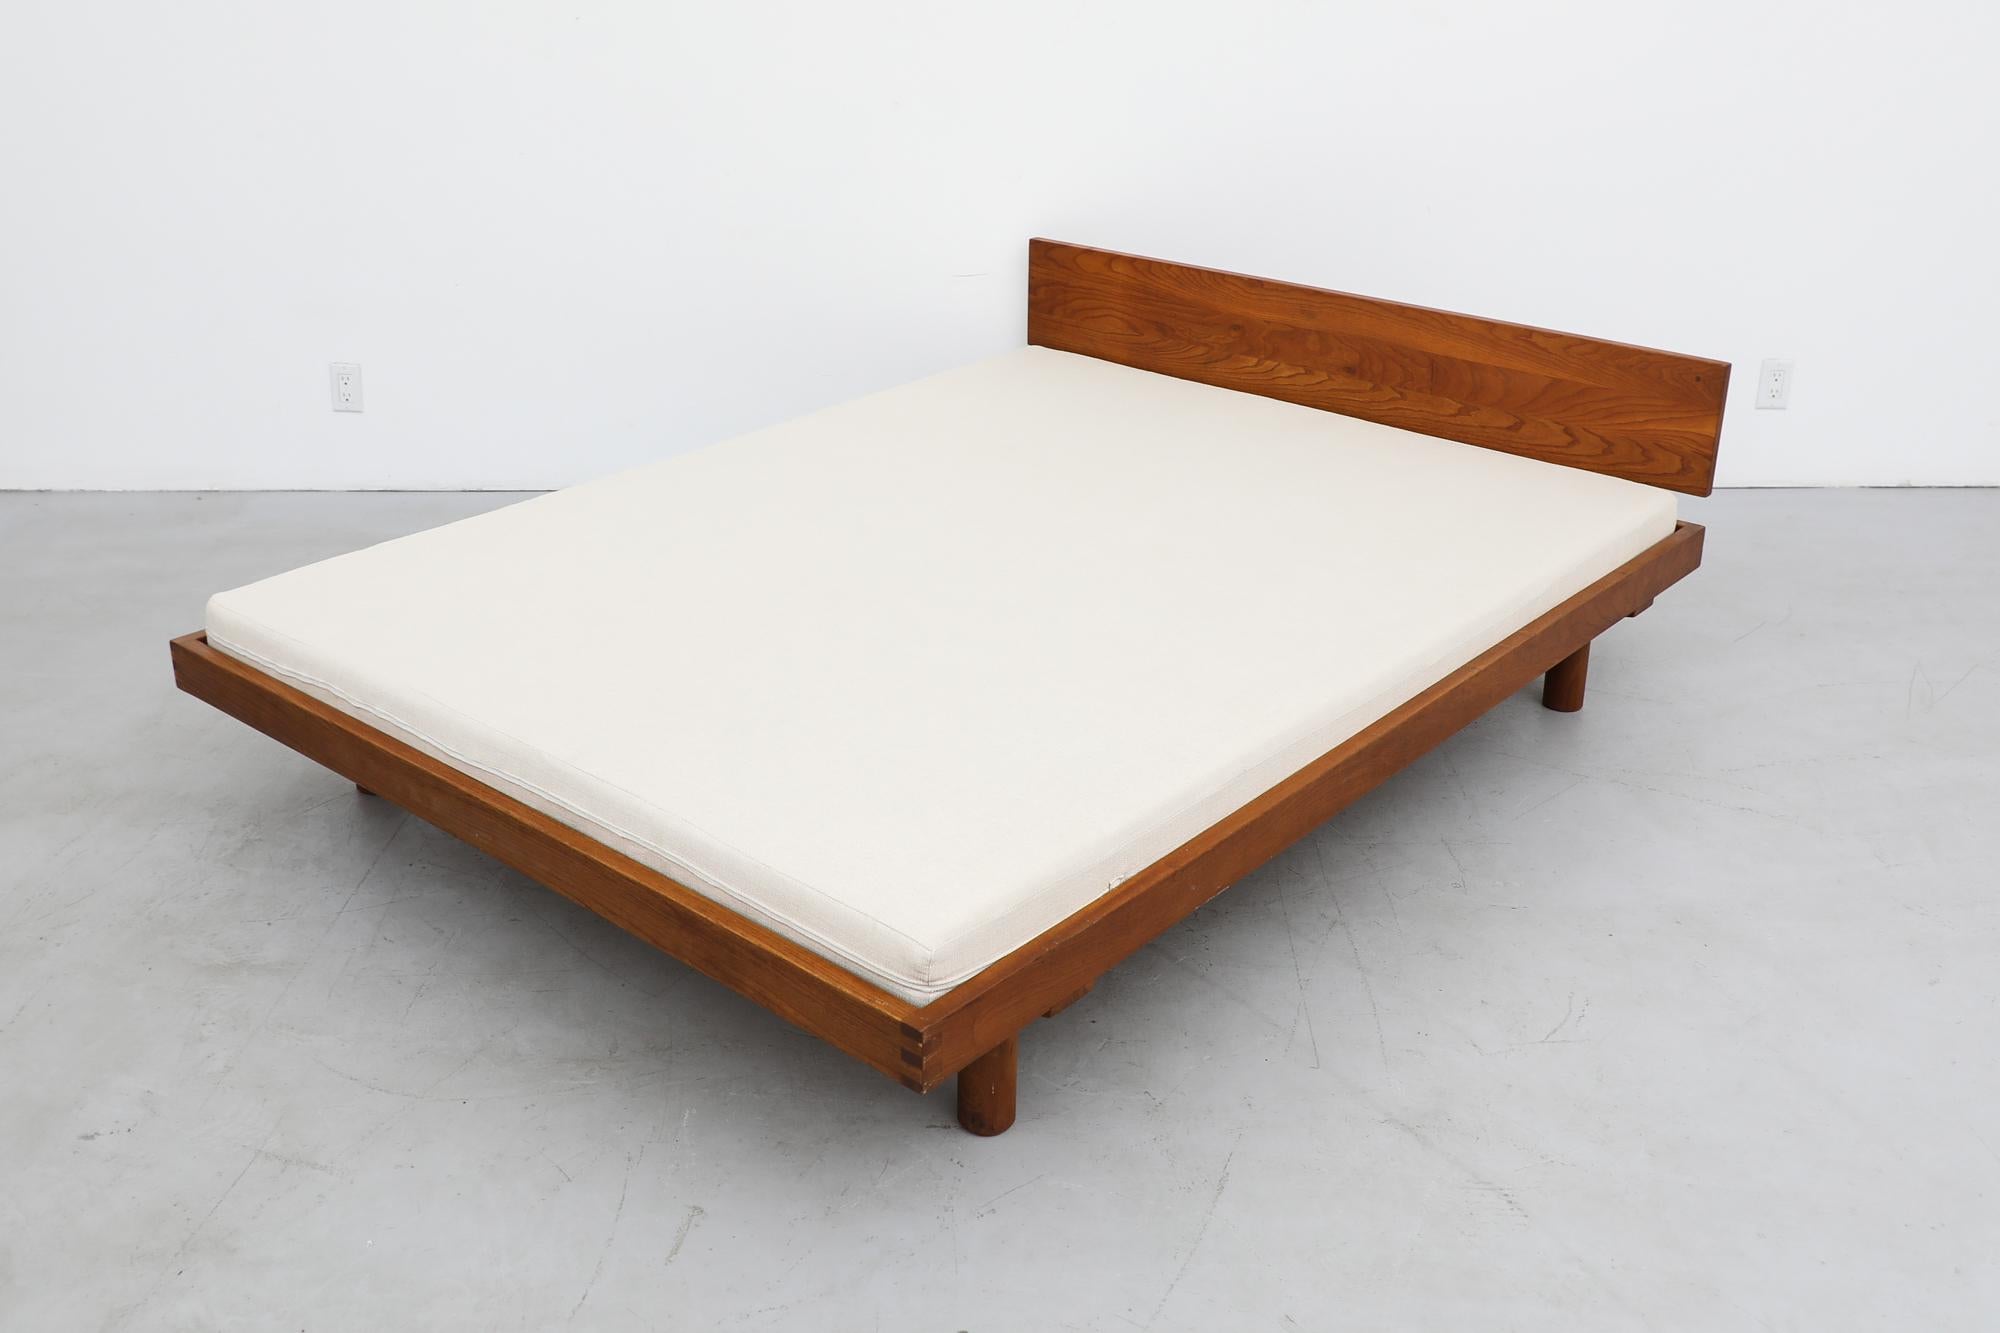 Pierre Chapo Model 'Godot/L01' Double Bed with Headboard in Elm, 1960s For Sale 2